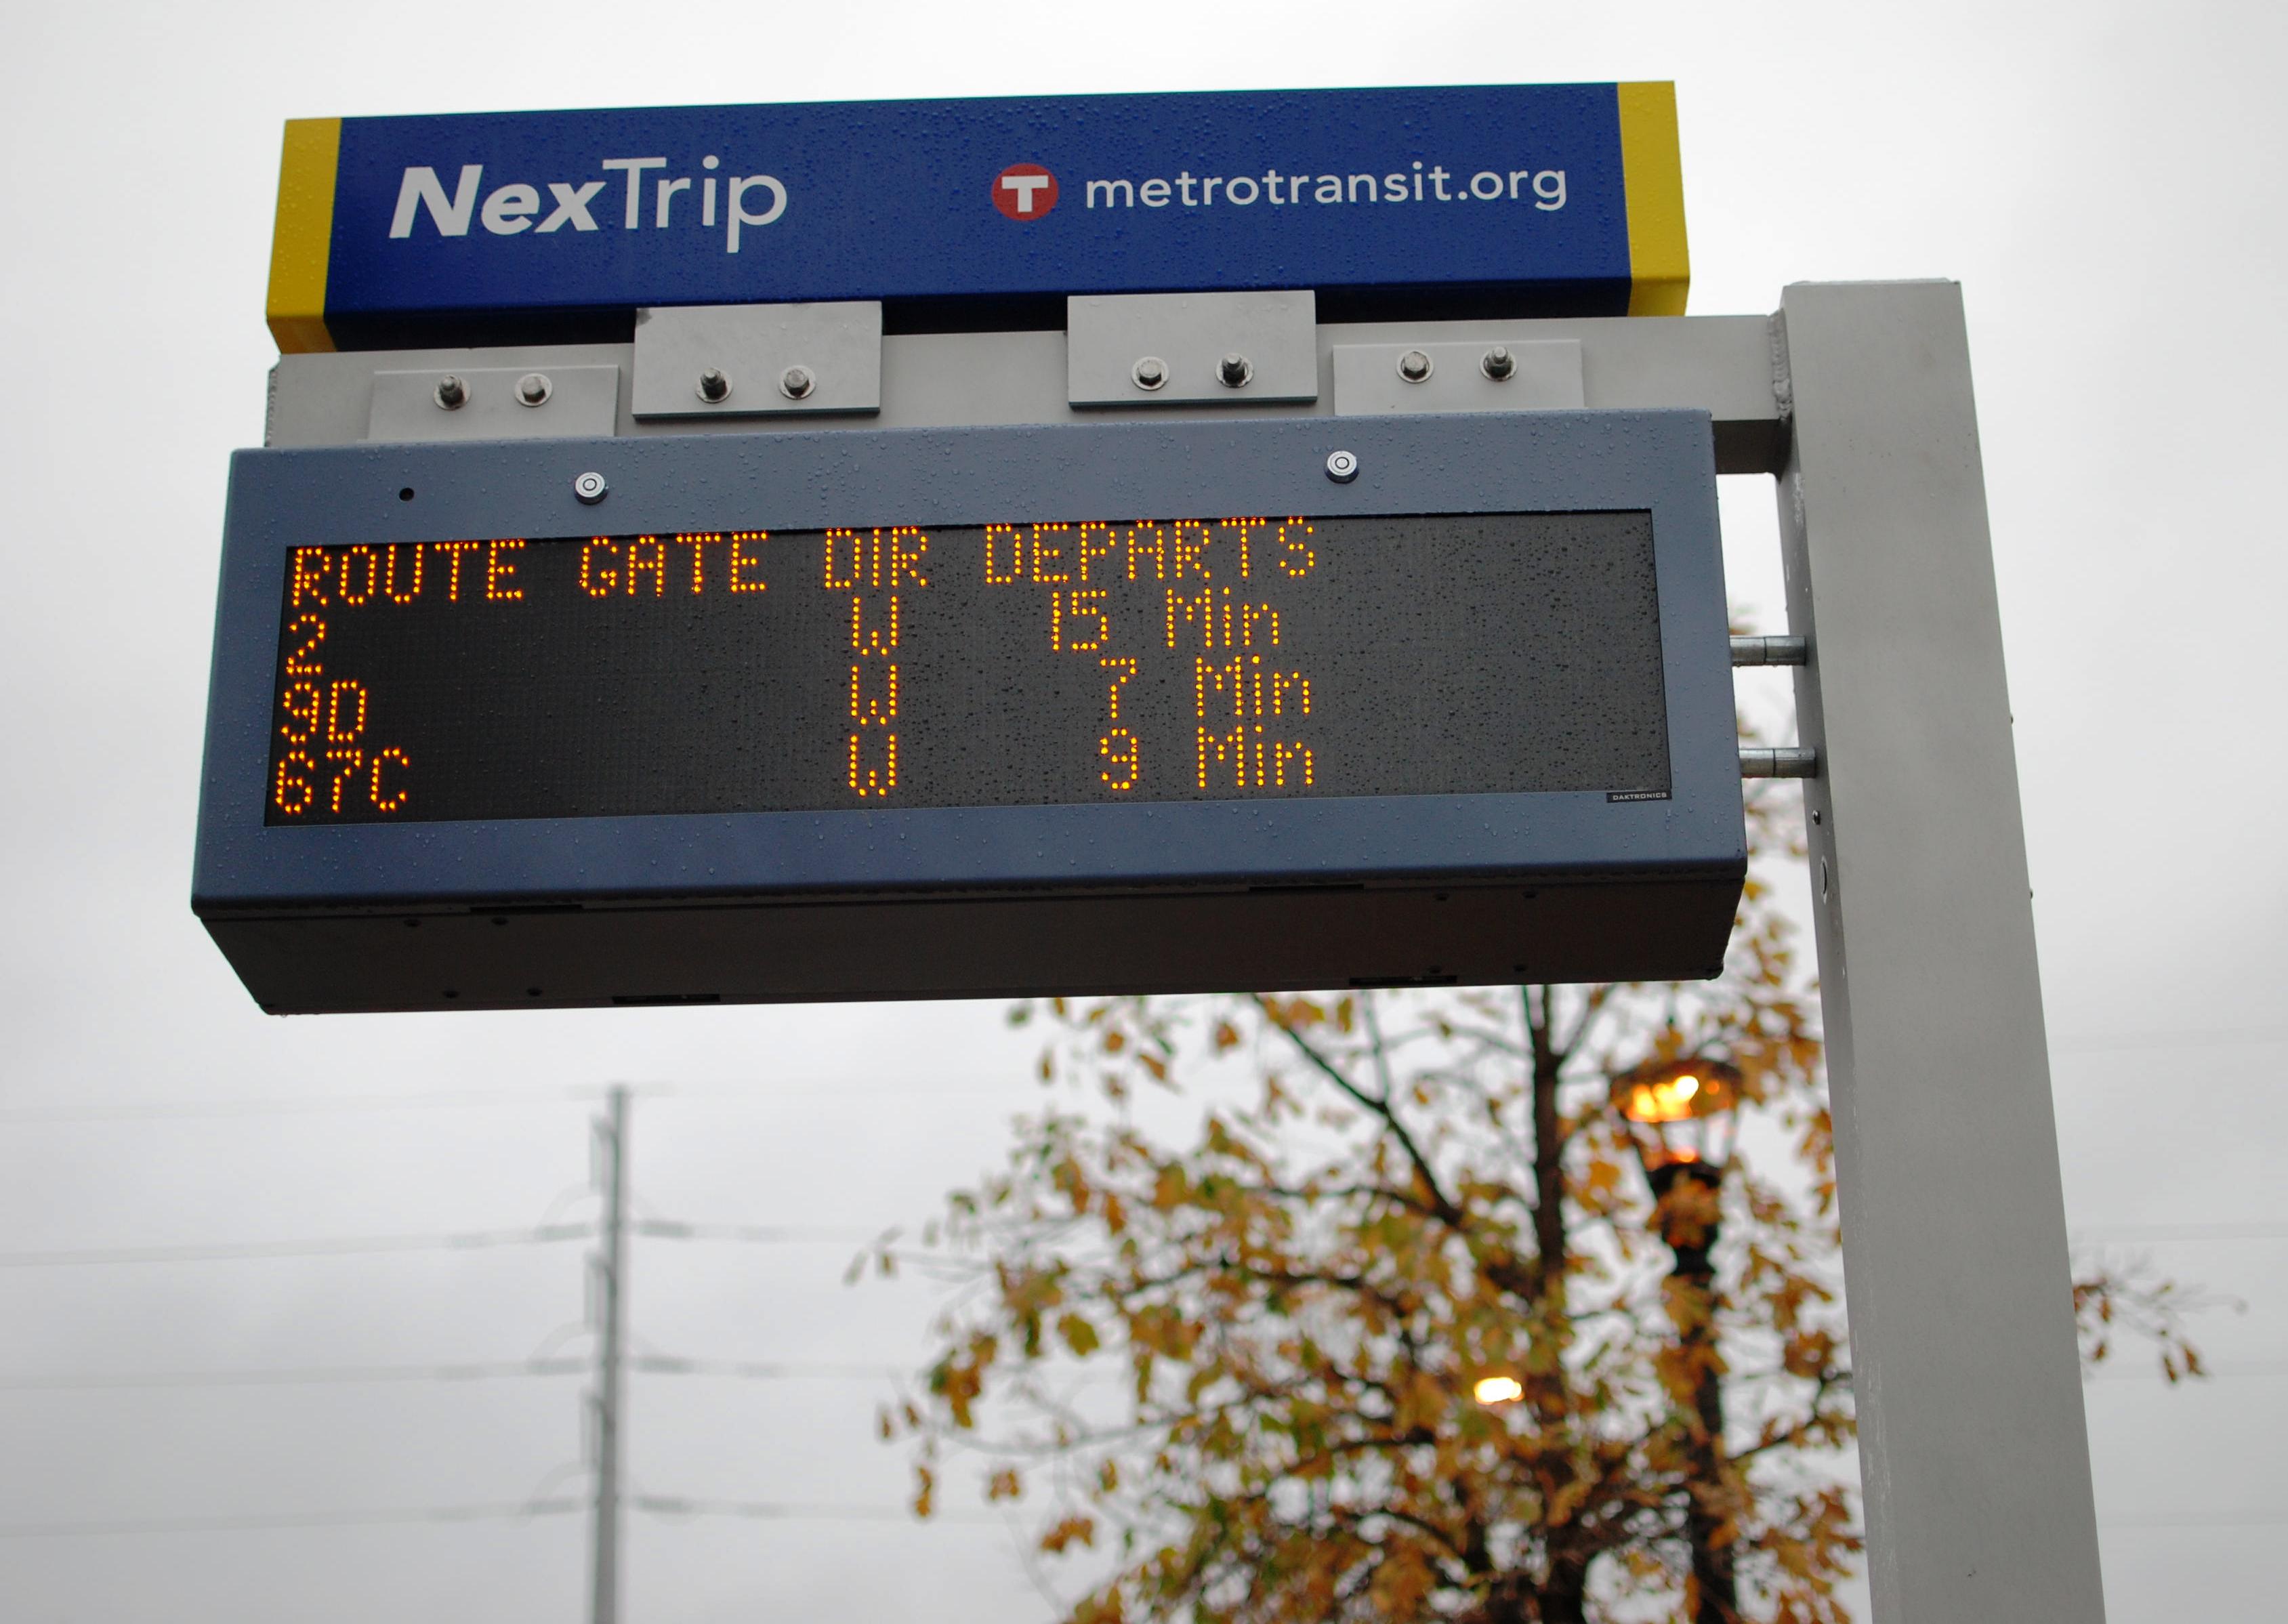 A NexTrip sign provides expected real-time departures for upcoming bus trips. The sign posts also have a button for audio information.